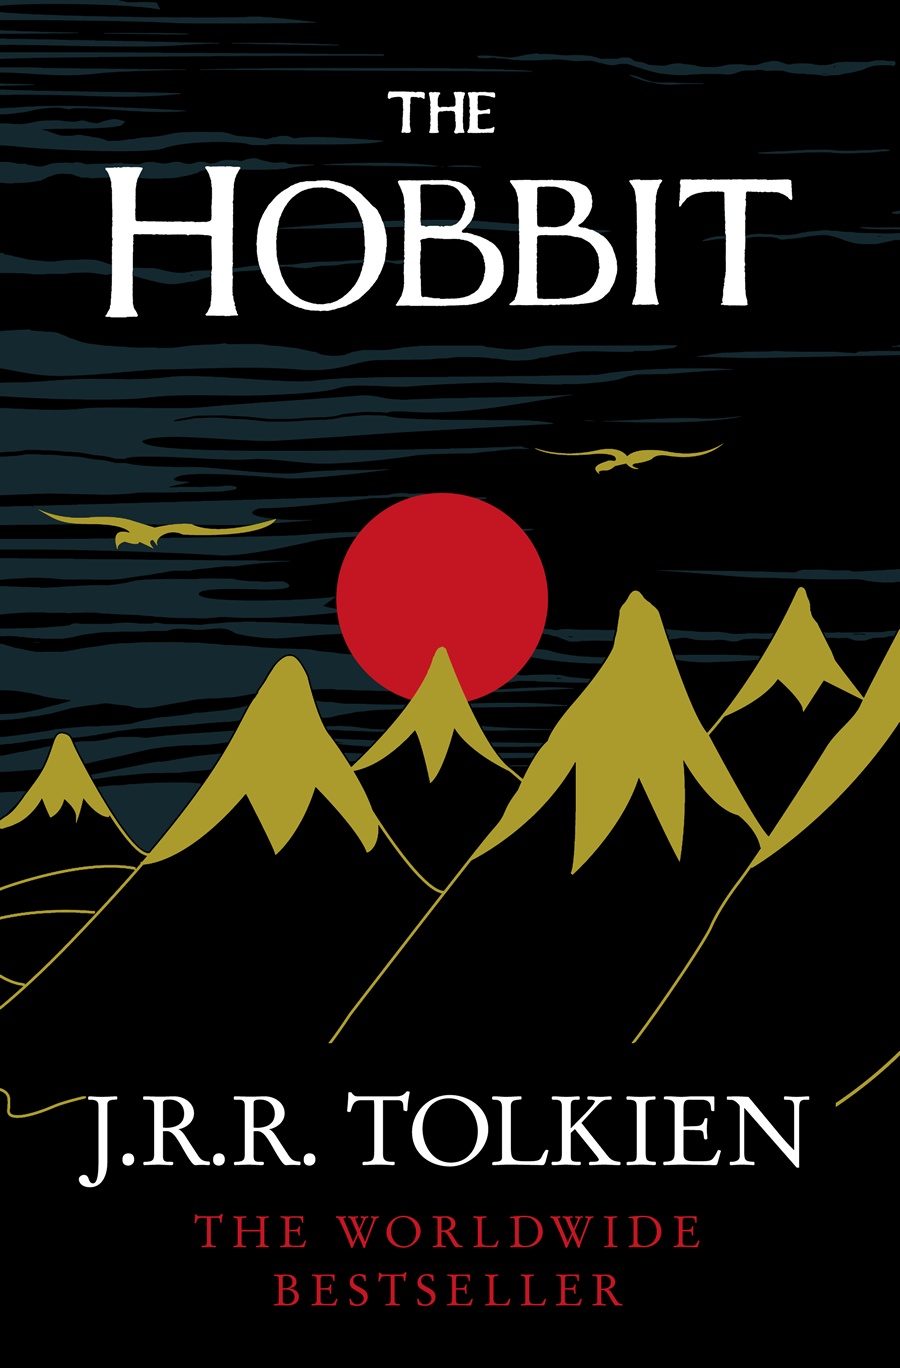 Top 10 Books To Read-the hobbit